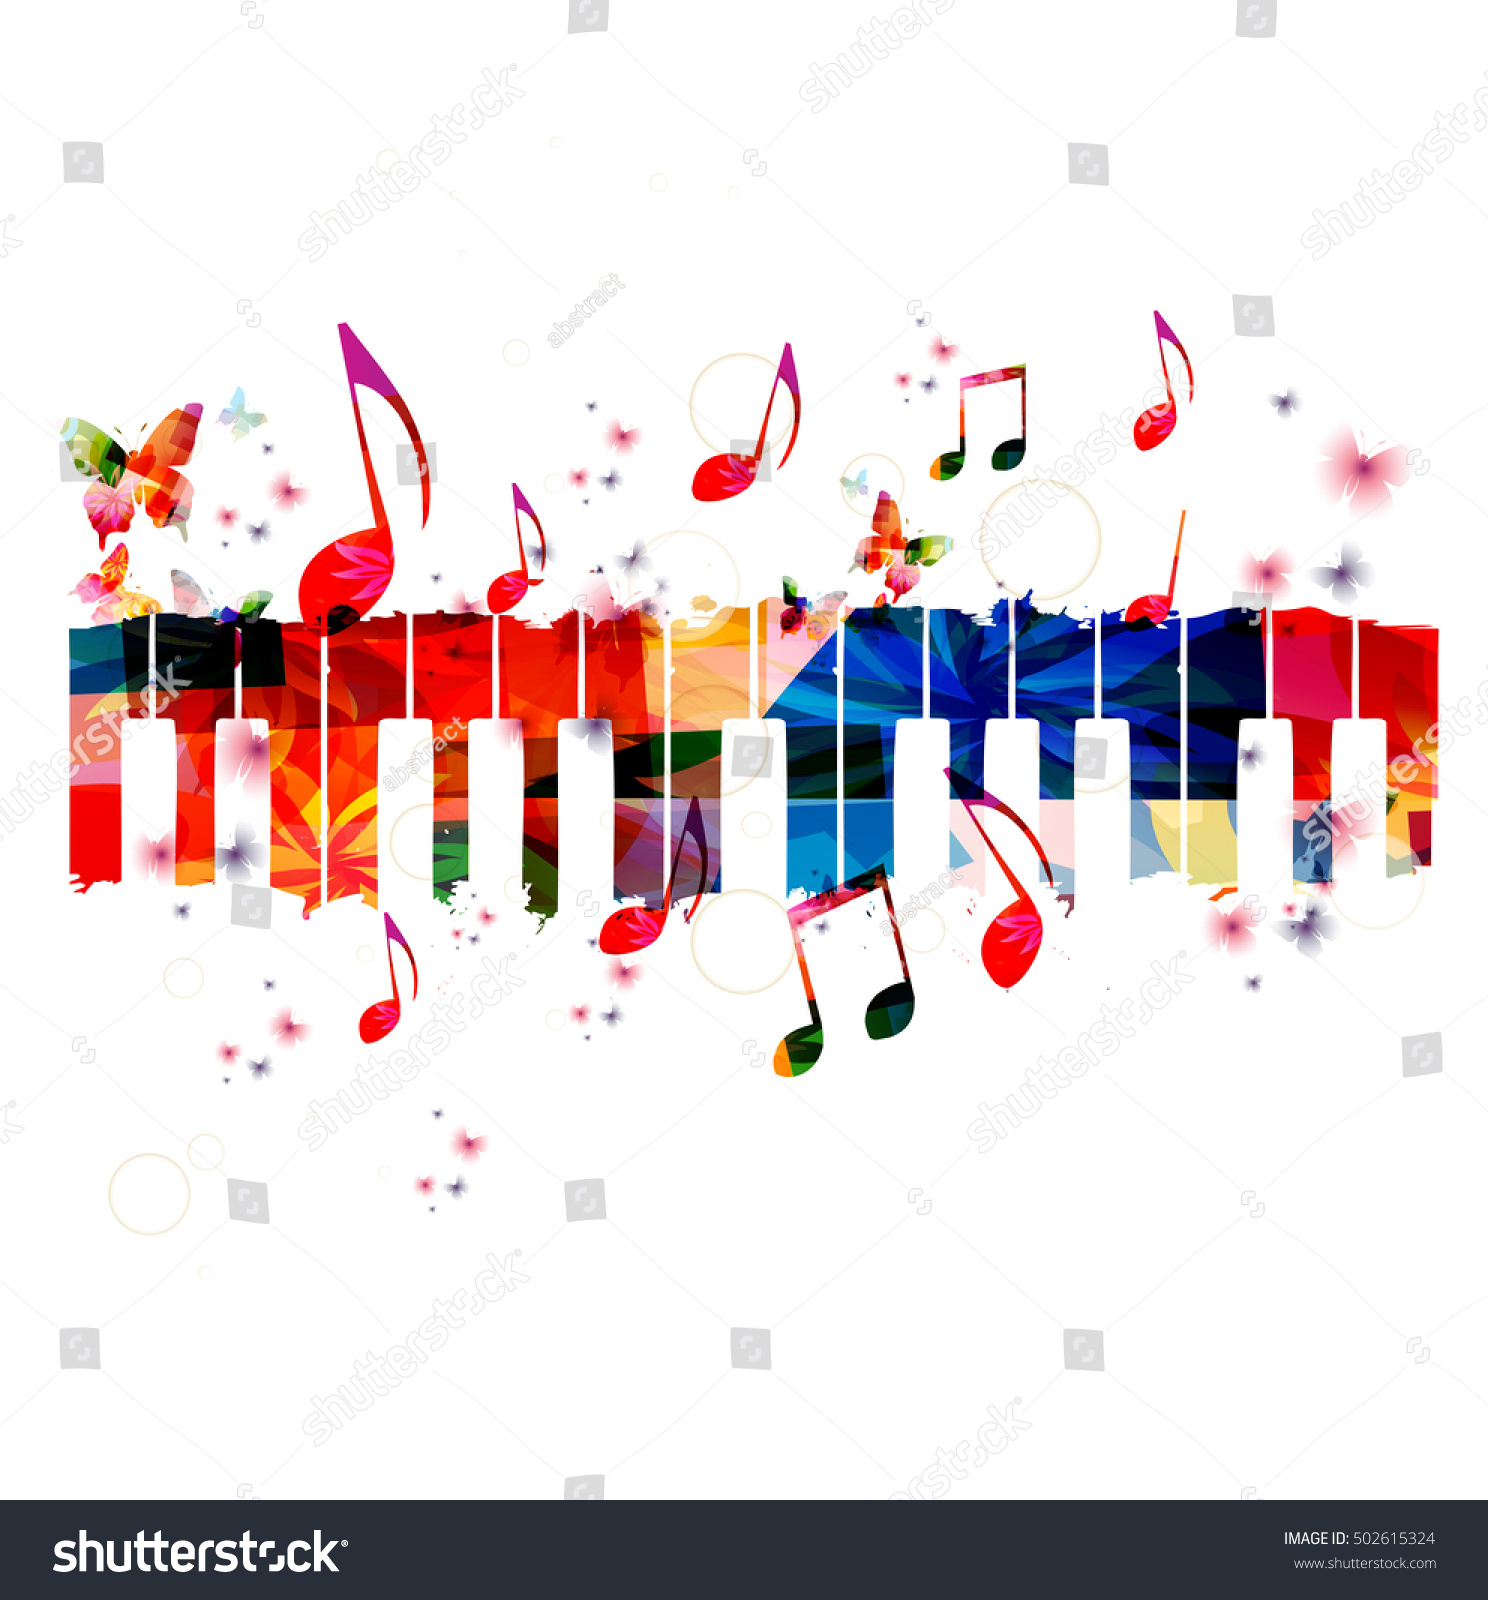 stock-vector-creative-music-style-template-vector-illustration-colorful-piano-keys-music-instrument-background-502615324.jpg